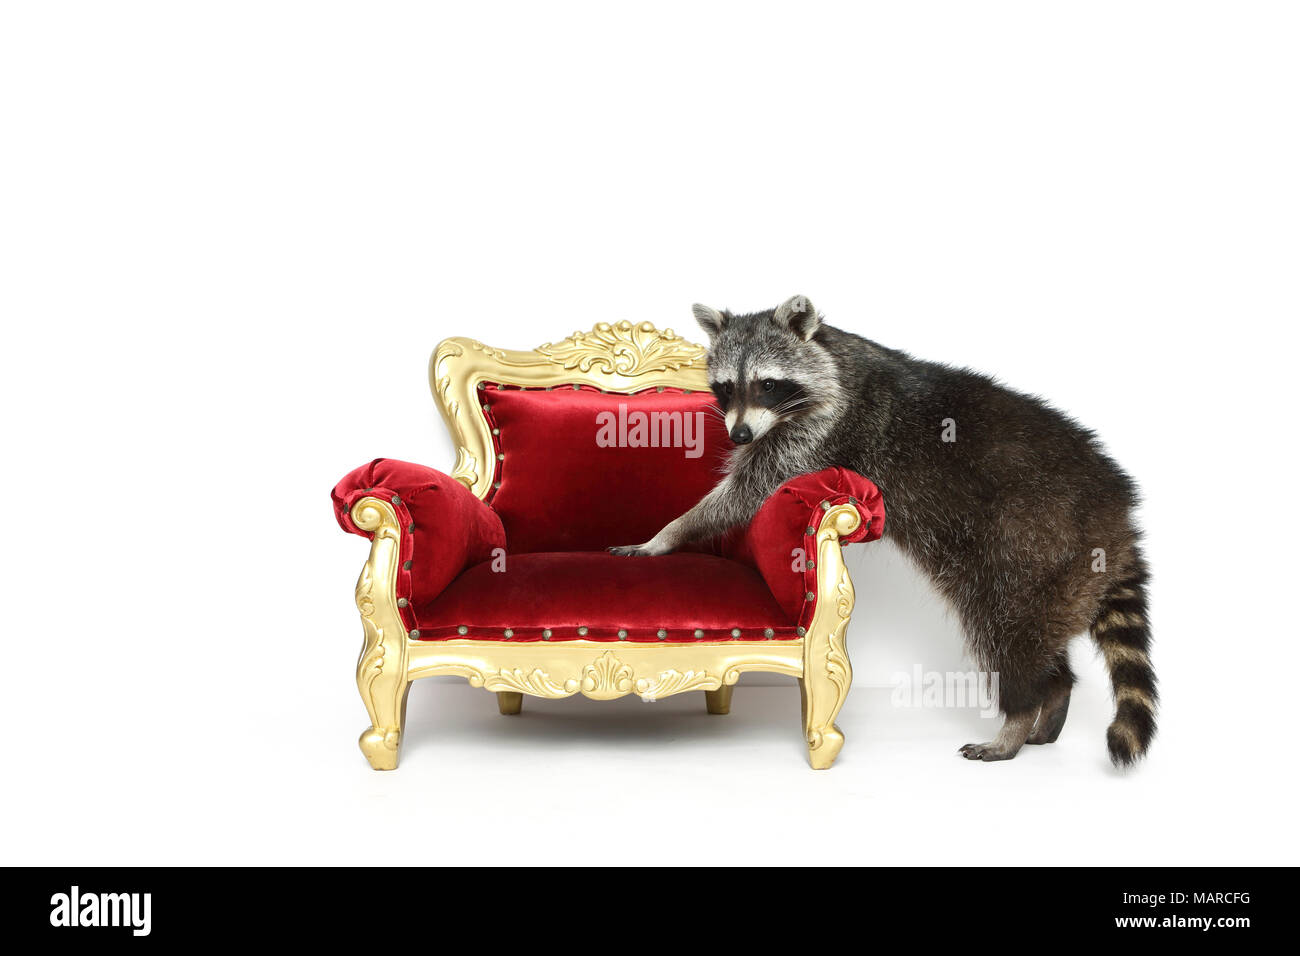 Raccoon (Procyon lotor). Adult climbing on a baroque armchair. Studio picture against a white background. Germany Stock Photo